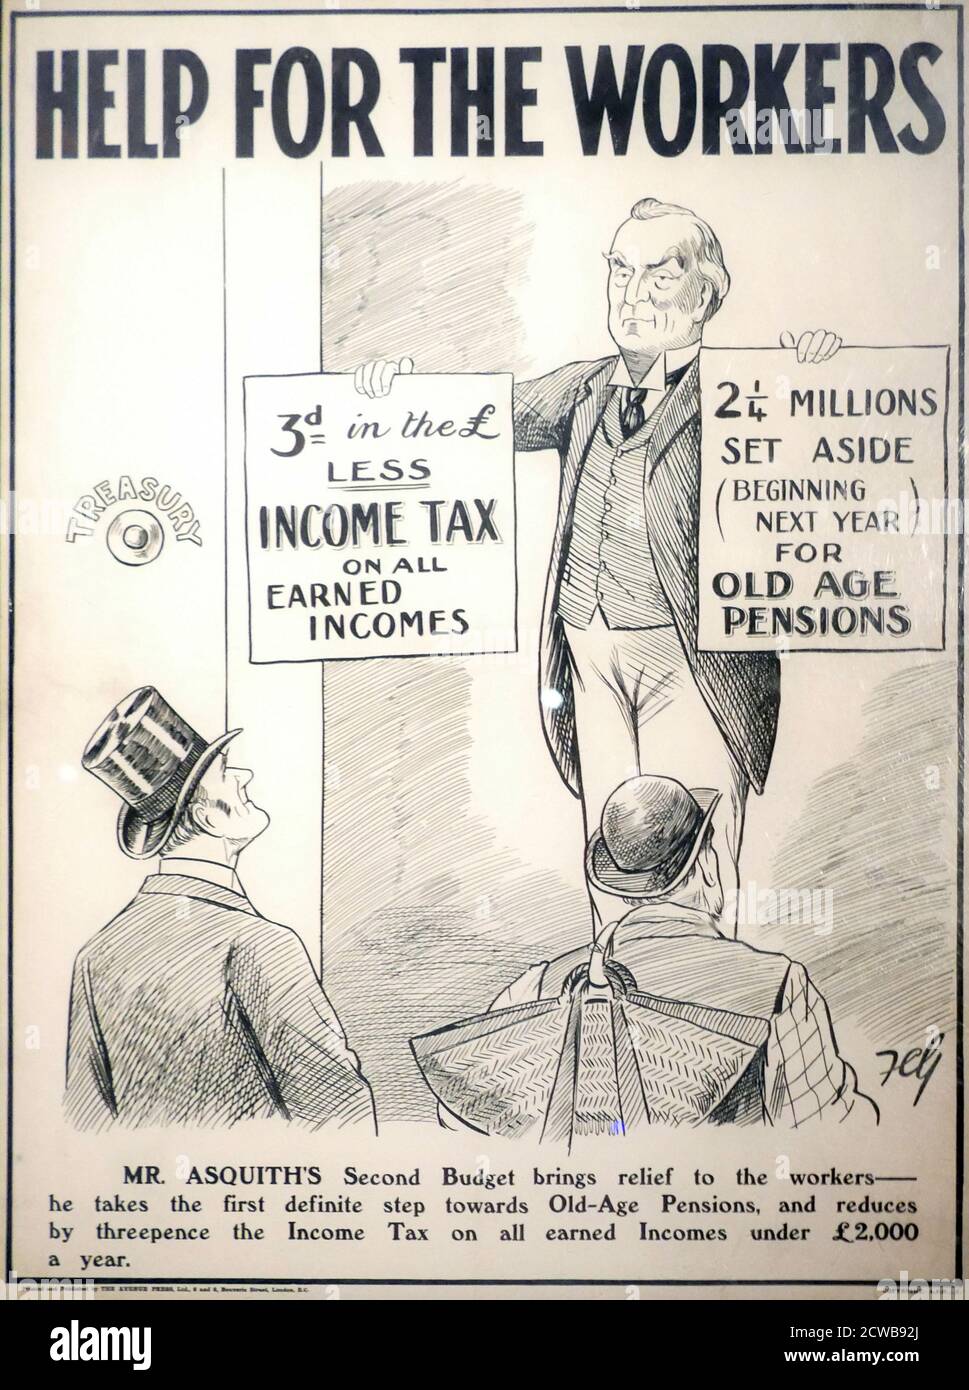 Cartoon showing Herbert Asquith presenting the 1909 'People's Budget'. Herbert Henry Asquith, (1852 - 1928), British Liberal politician and Prime Minister of the United Kingdom from 1908 to 1916. In a major speech in December 1908, Asquith announced that the upcoming budget would reflect the Liberals' policy agenda, and the People's Budget that was submitted to Parliament by Lloyd George the following year greatly expanded social welfare programmes. Stock Photo